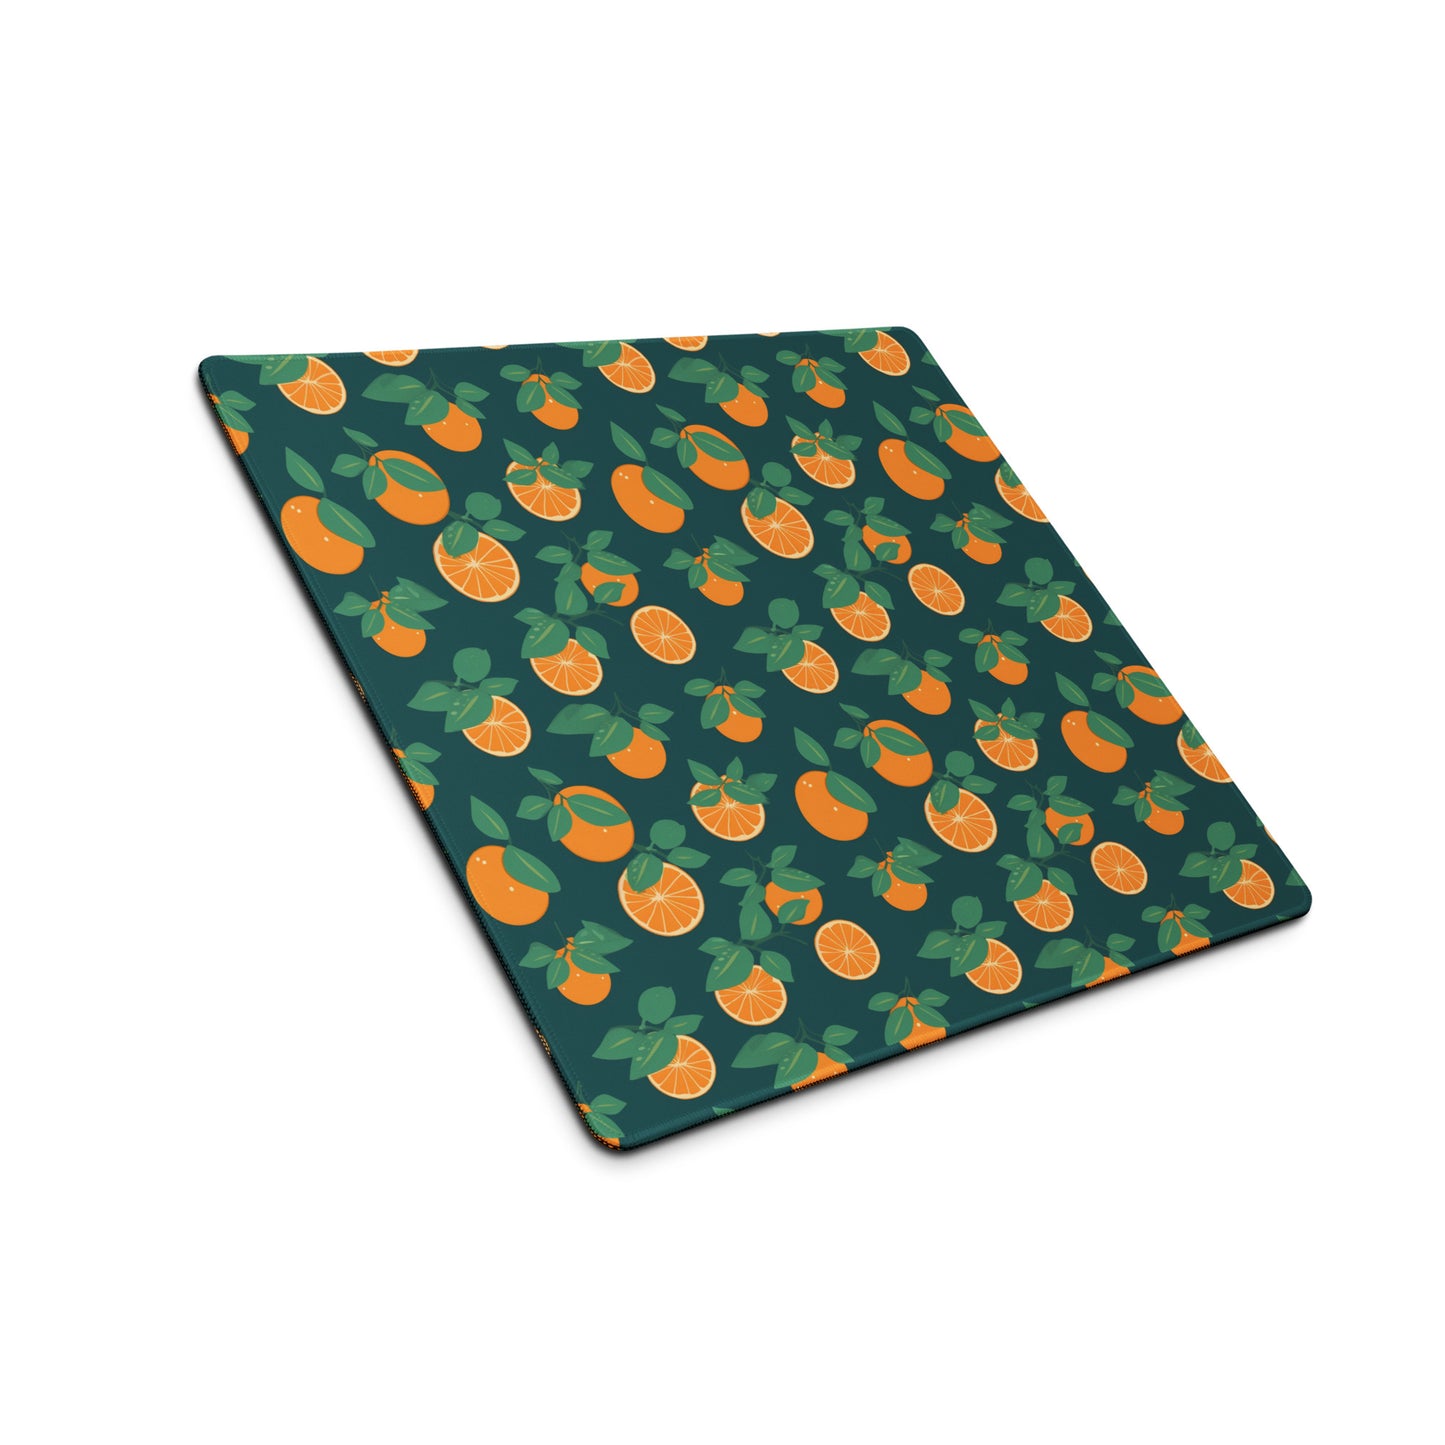 A 18" x 16" desk pad with oranges all over it shown at an angle. Orange and Blue in color.